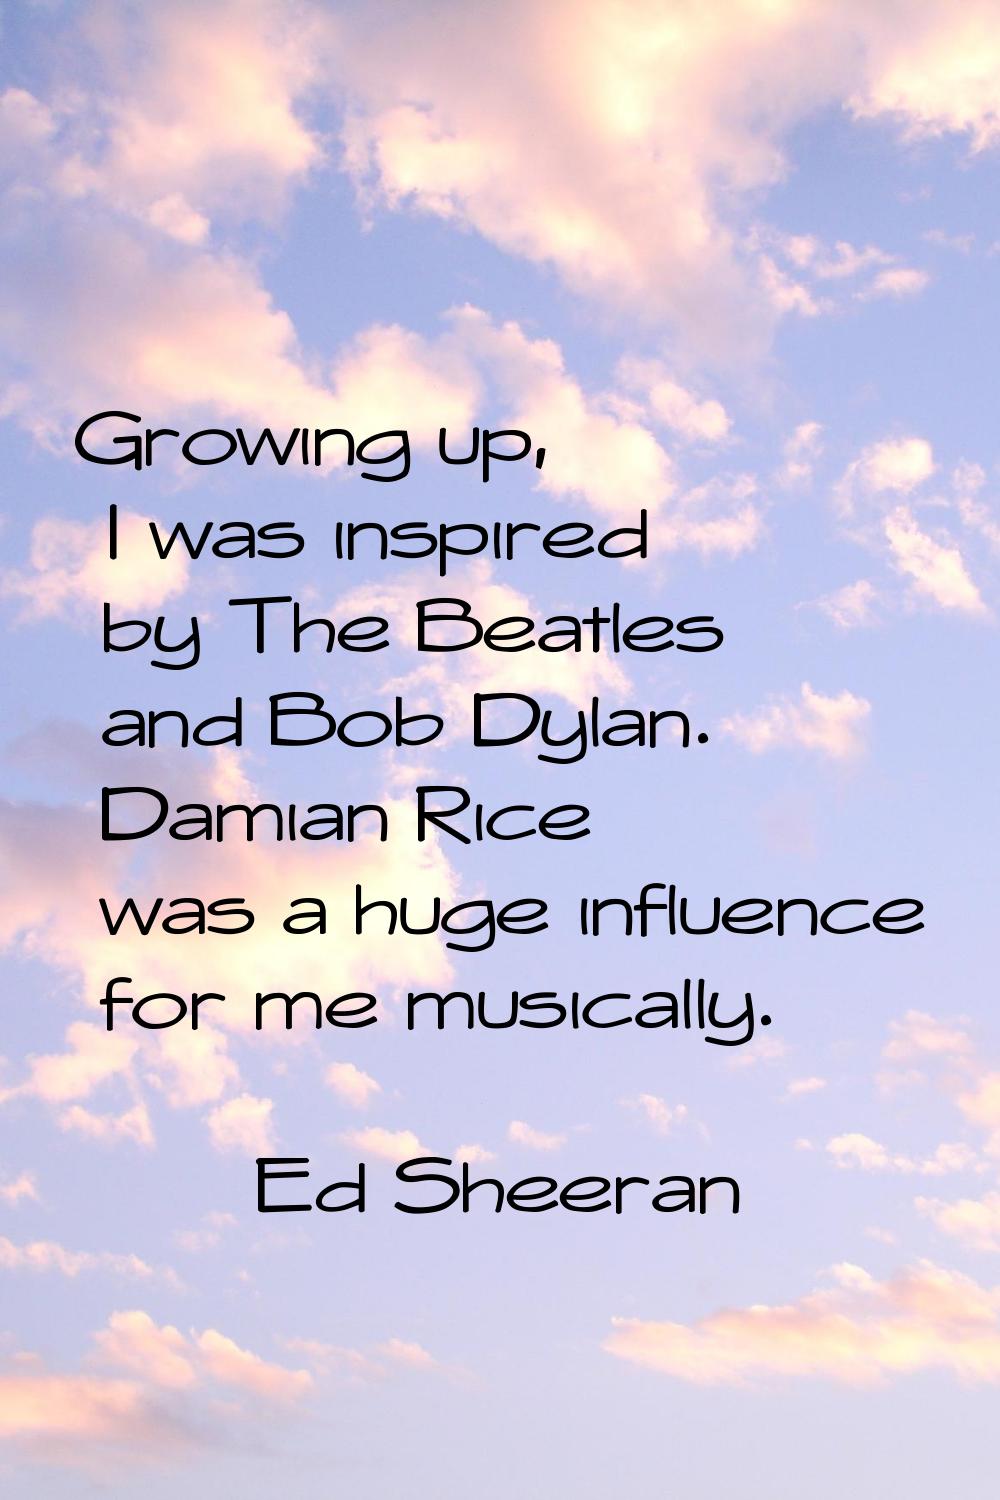 Growing up, I was inspired by The Beatles and Bob Dylan. Damian Rice was a huge influence for me mu